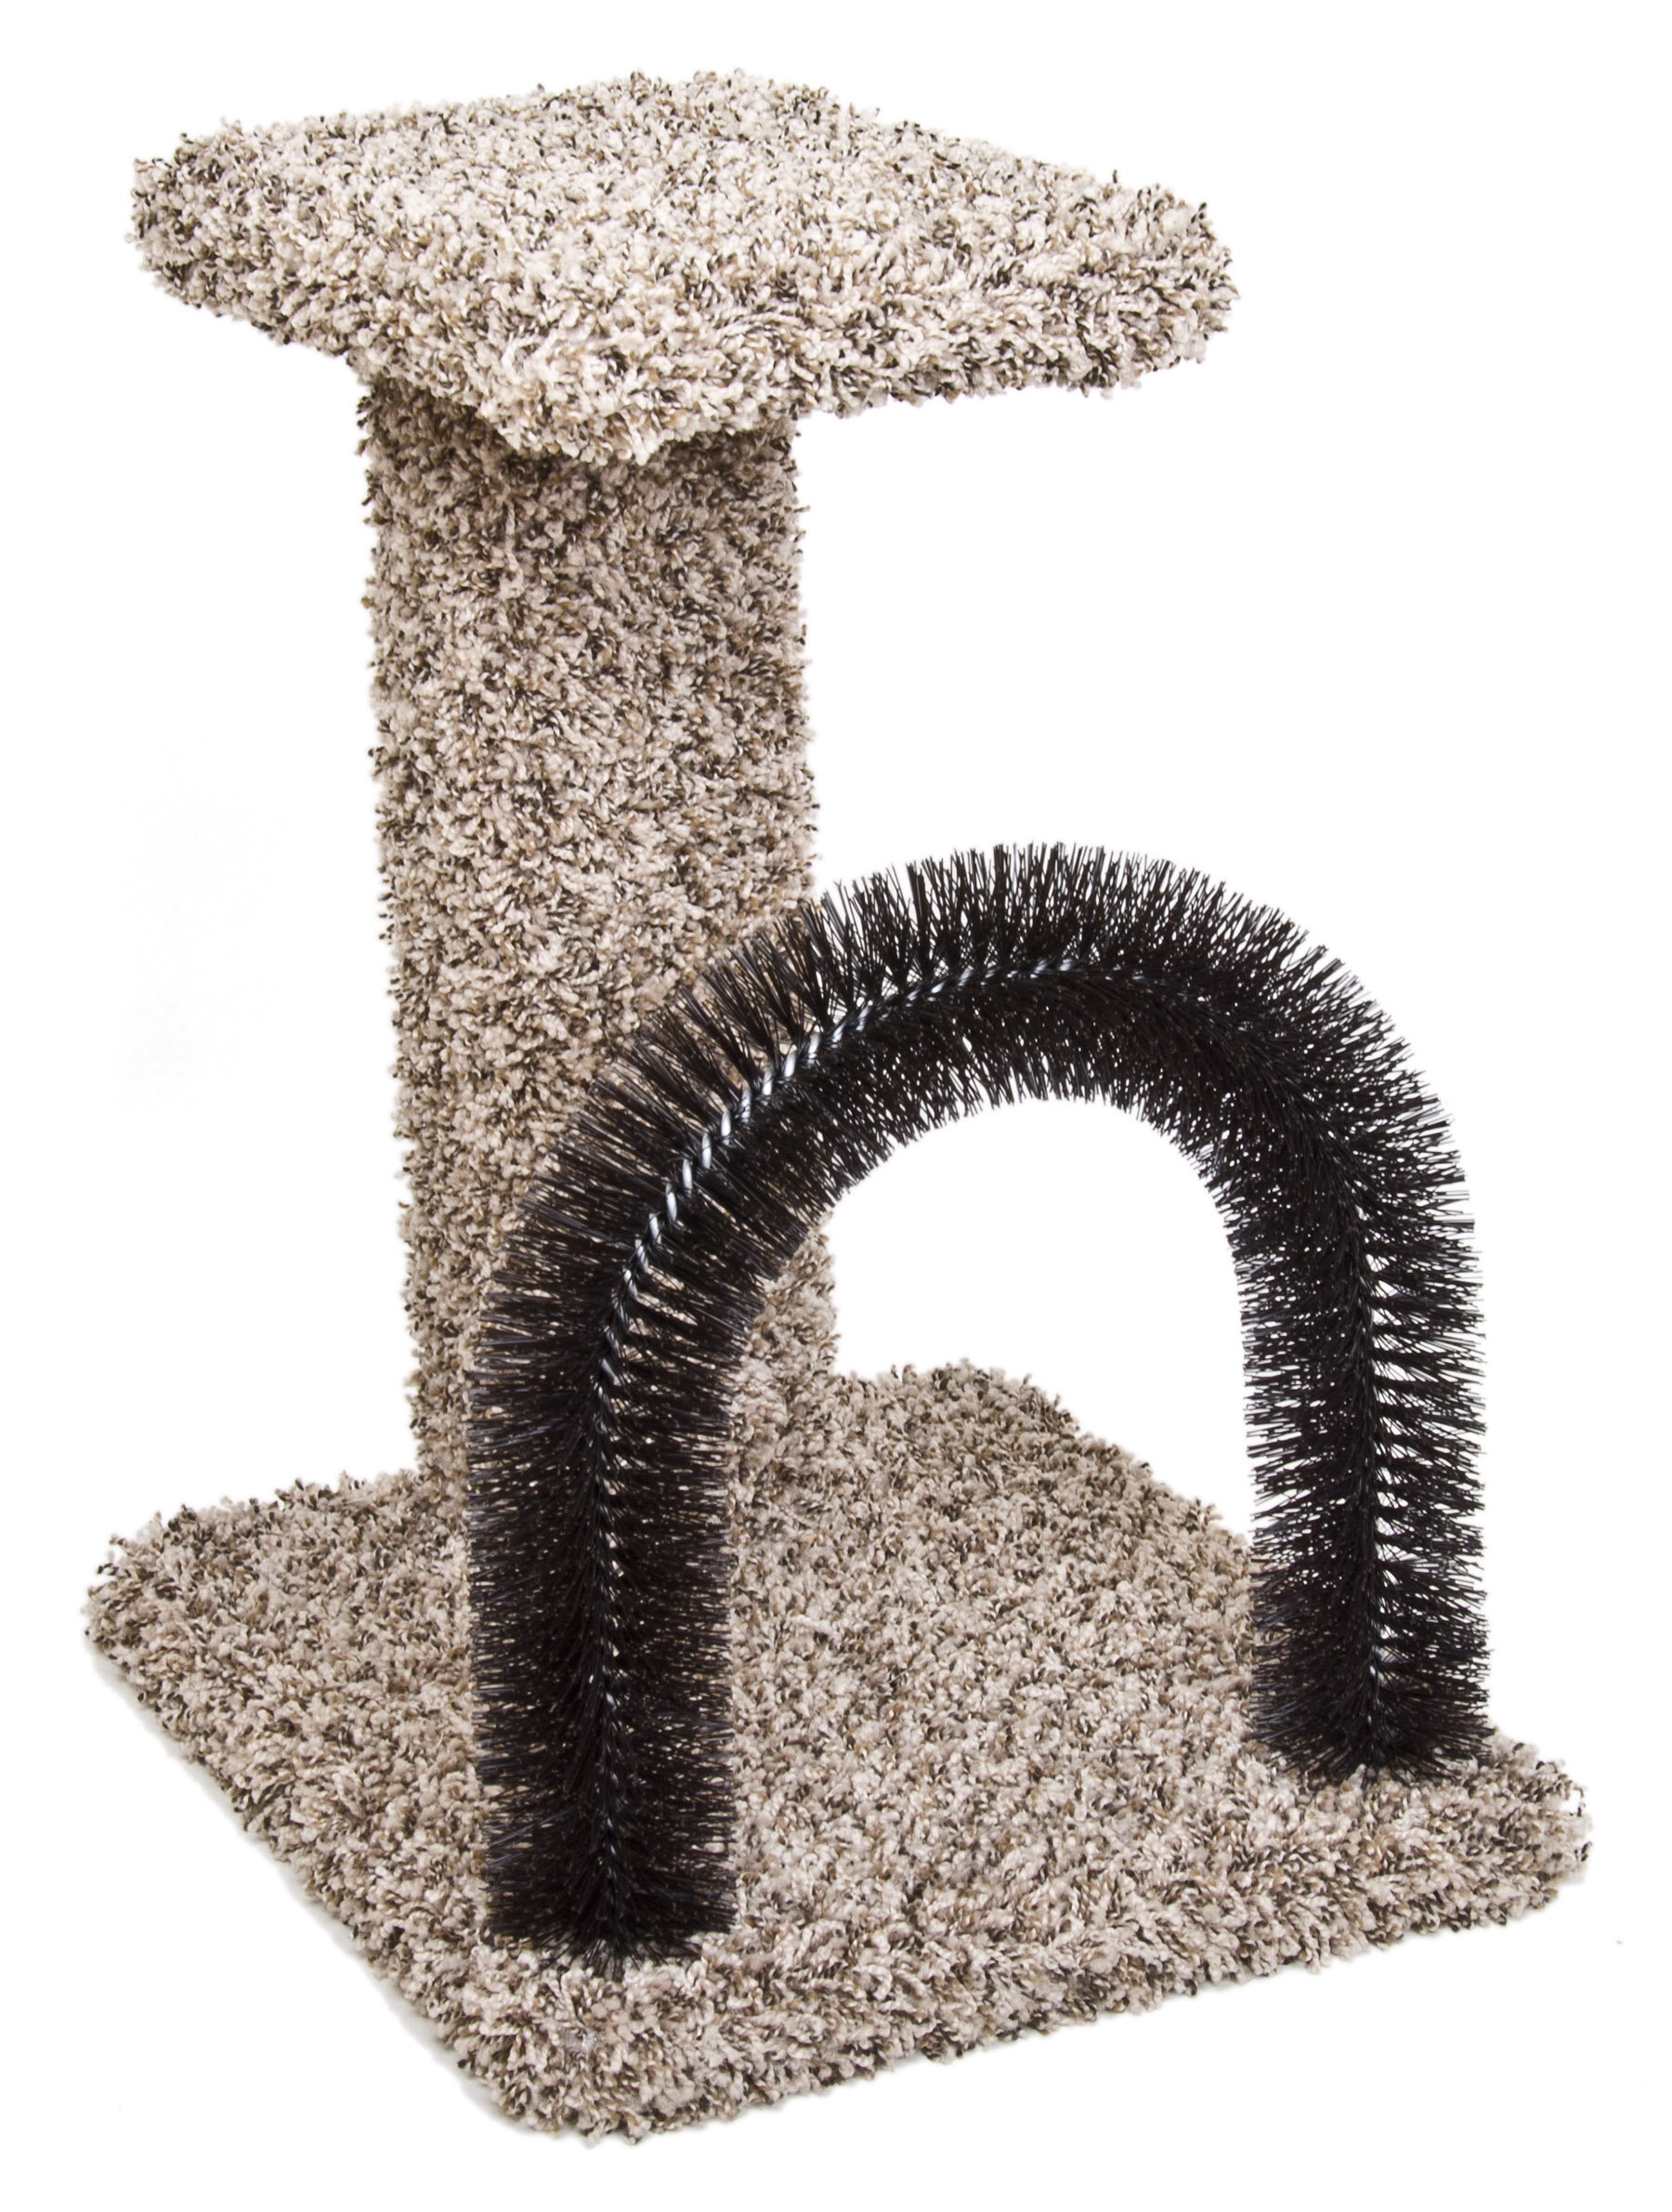 scratching post with perch